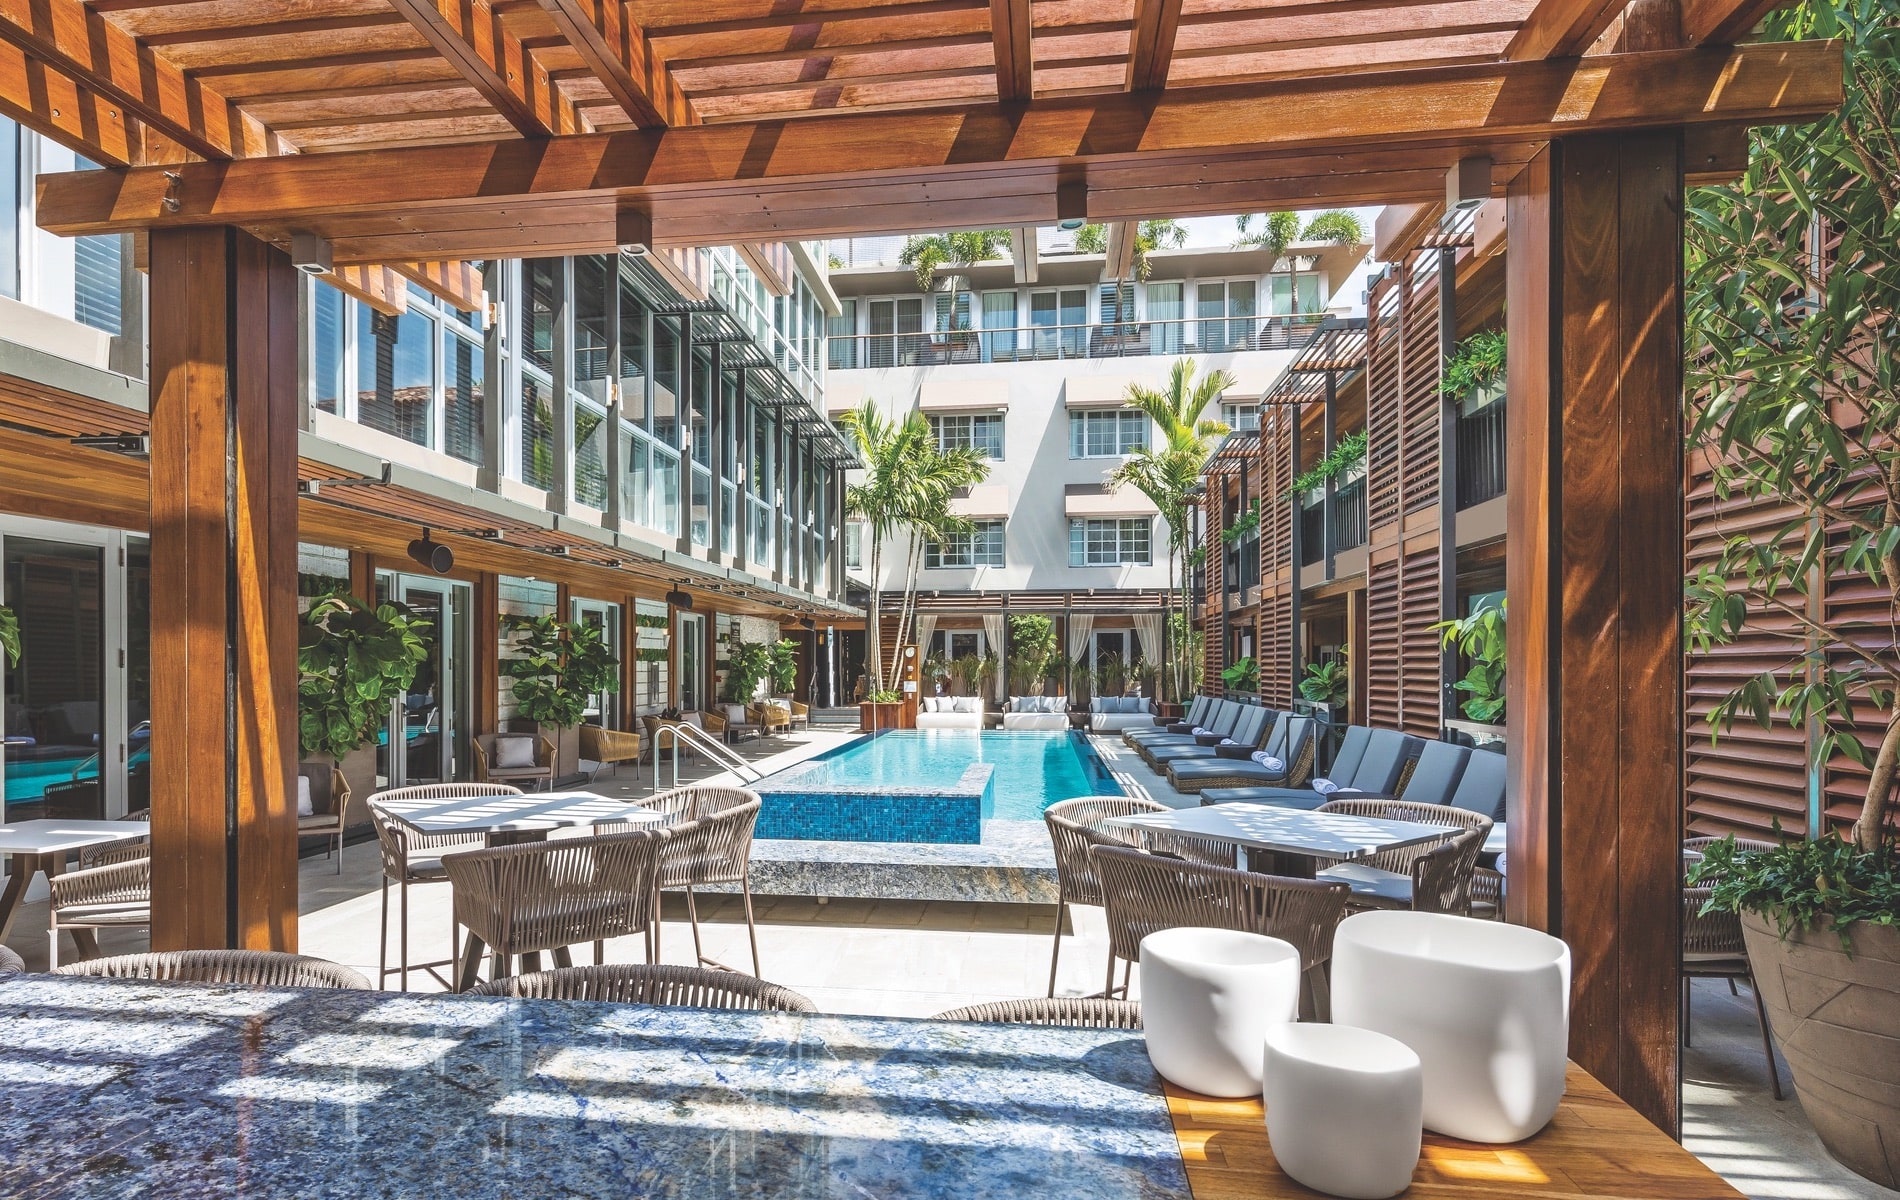 Lennox Hotel kept the Art Deco facade of their historic building intact but performed major renovations to create a sleek, inviting interior and beautiful courtyard pool area.